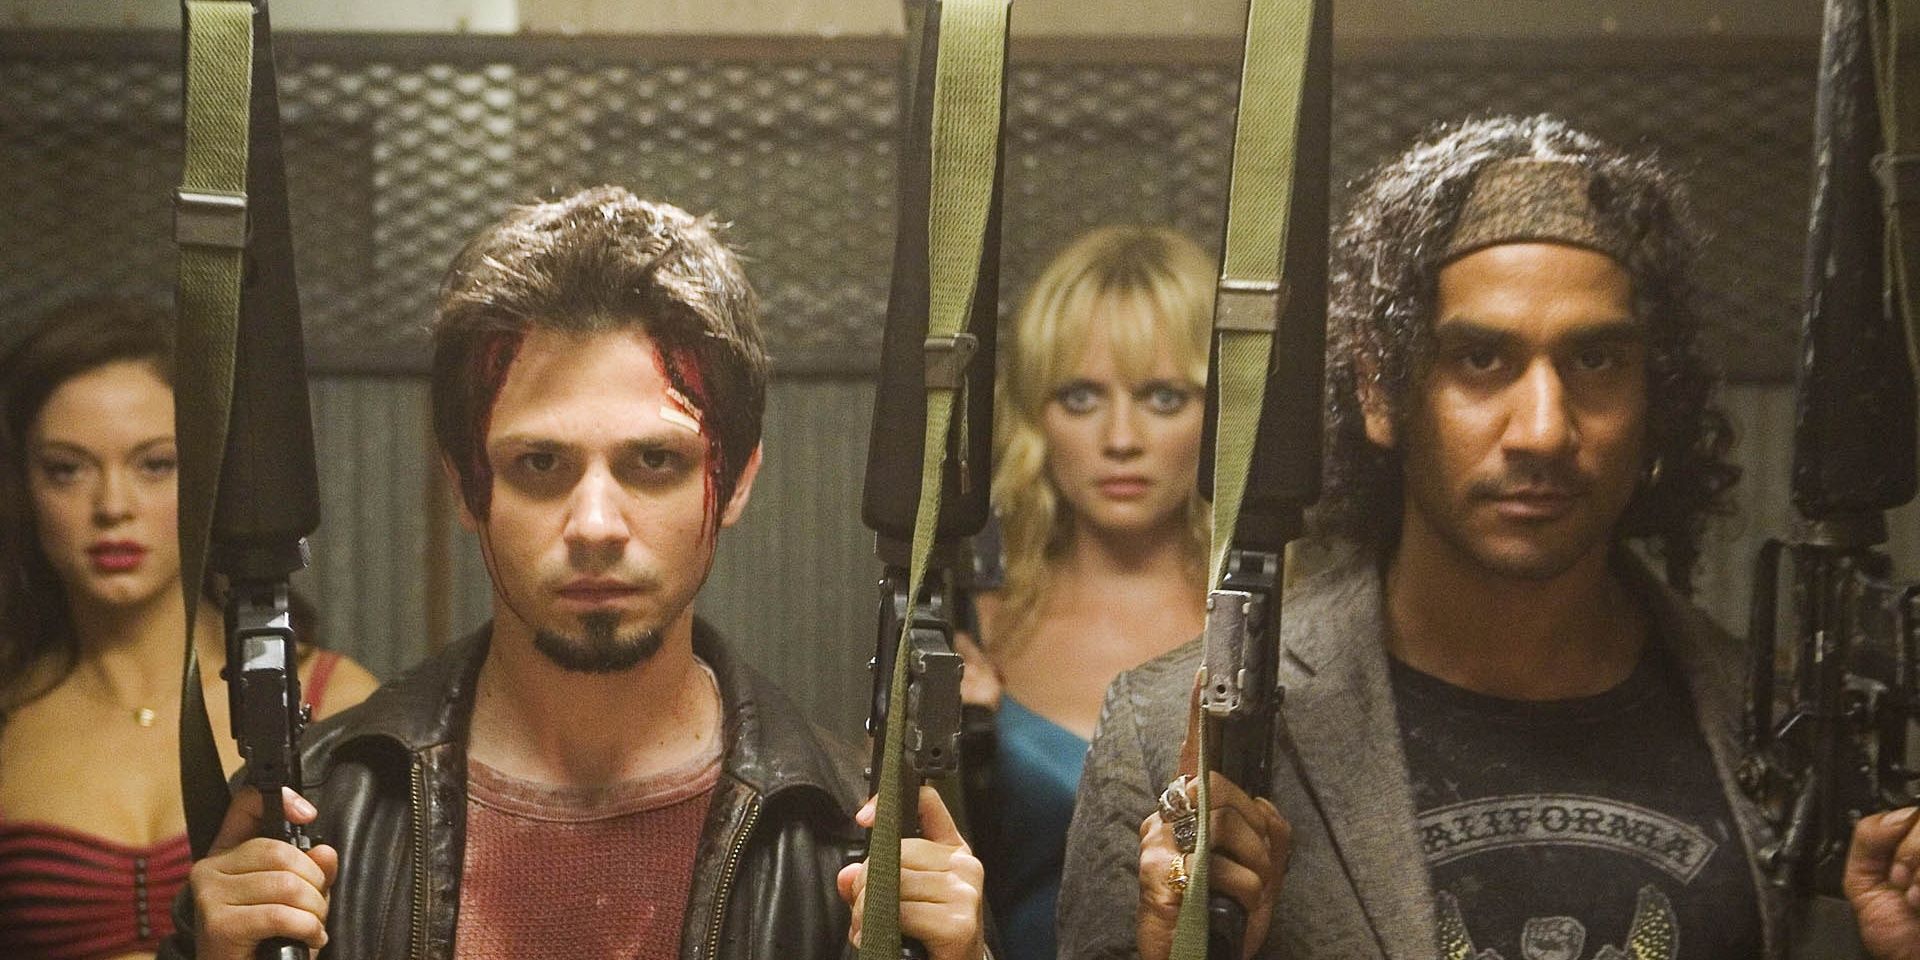 The cast of Planet Terror